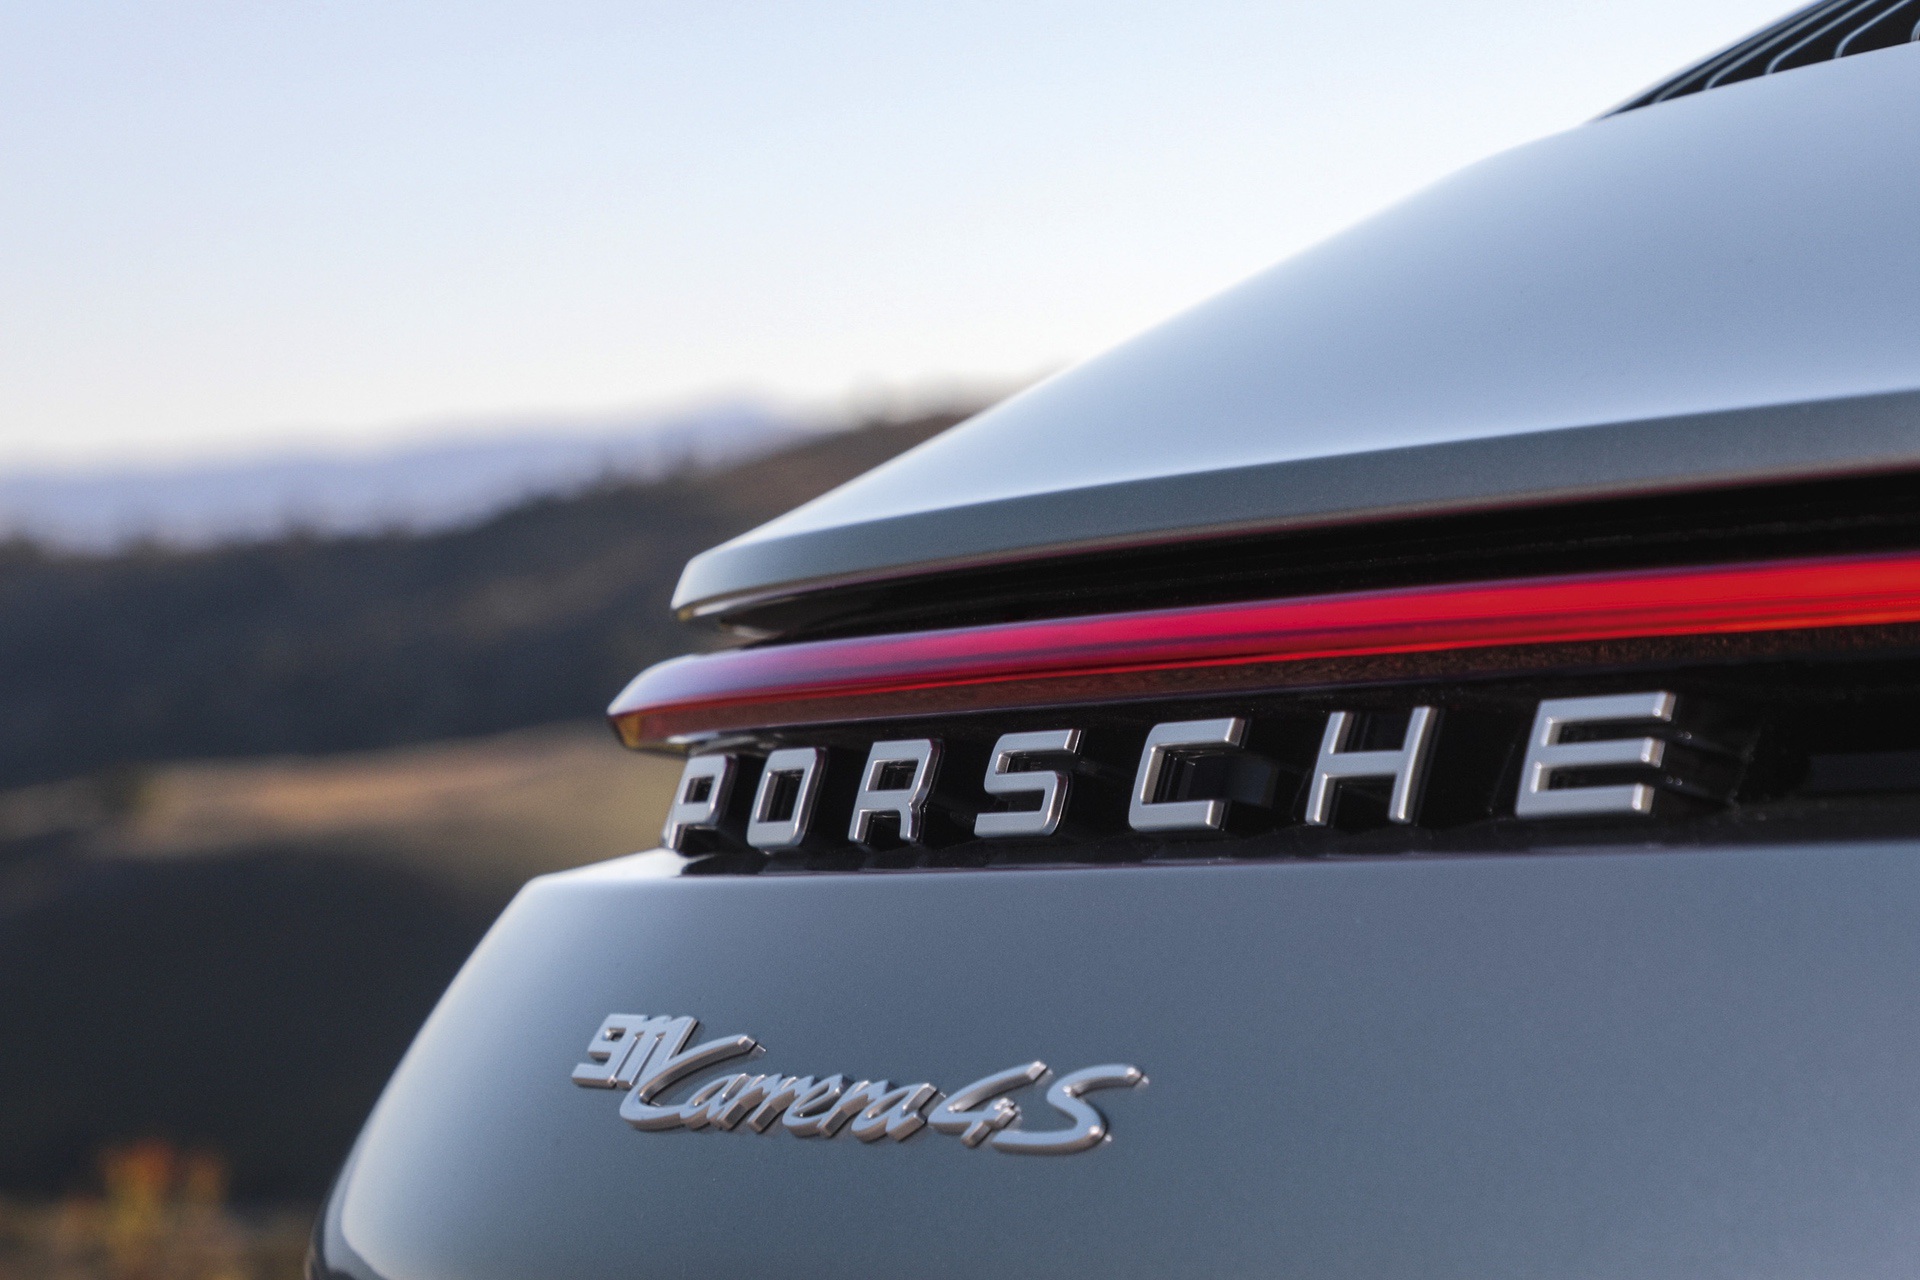 2020 Type 992 911 Carrera 4S badging on the rear of the car